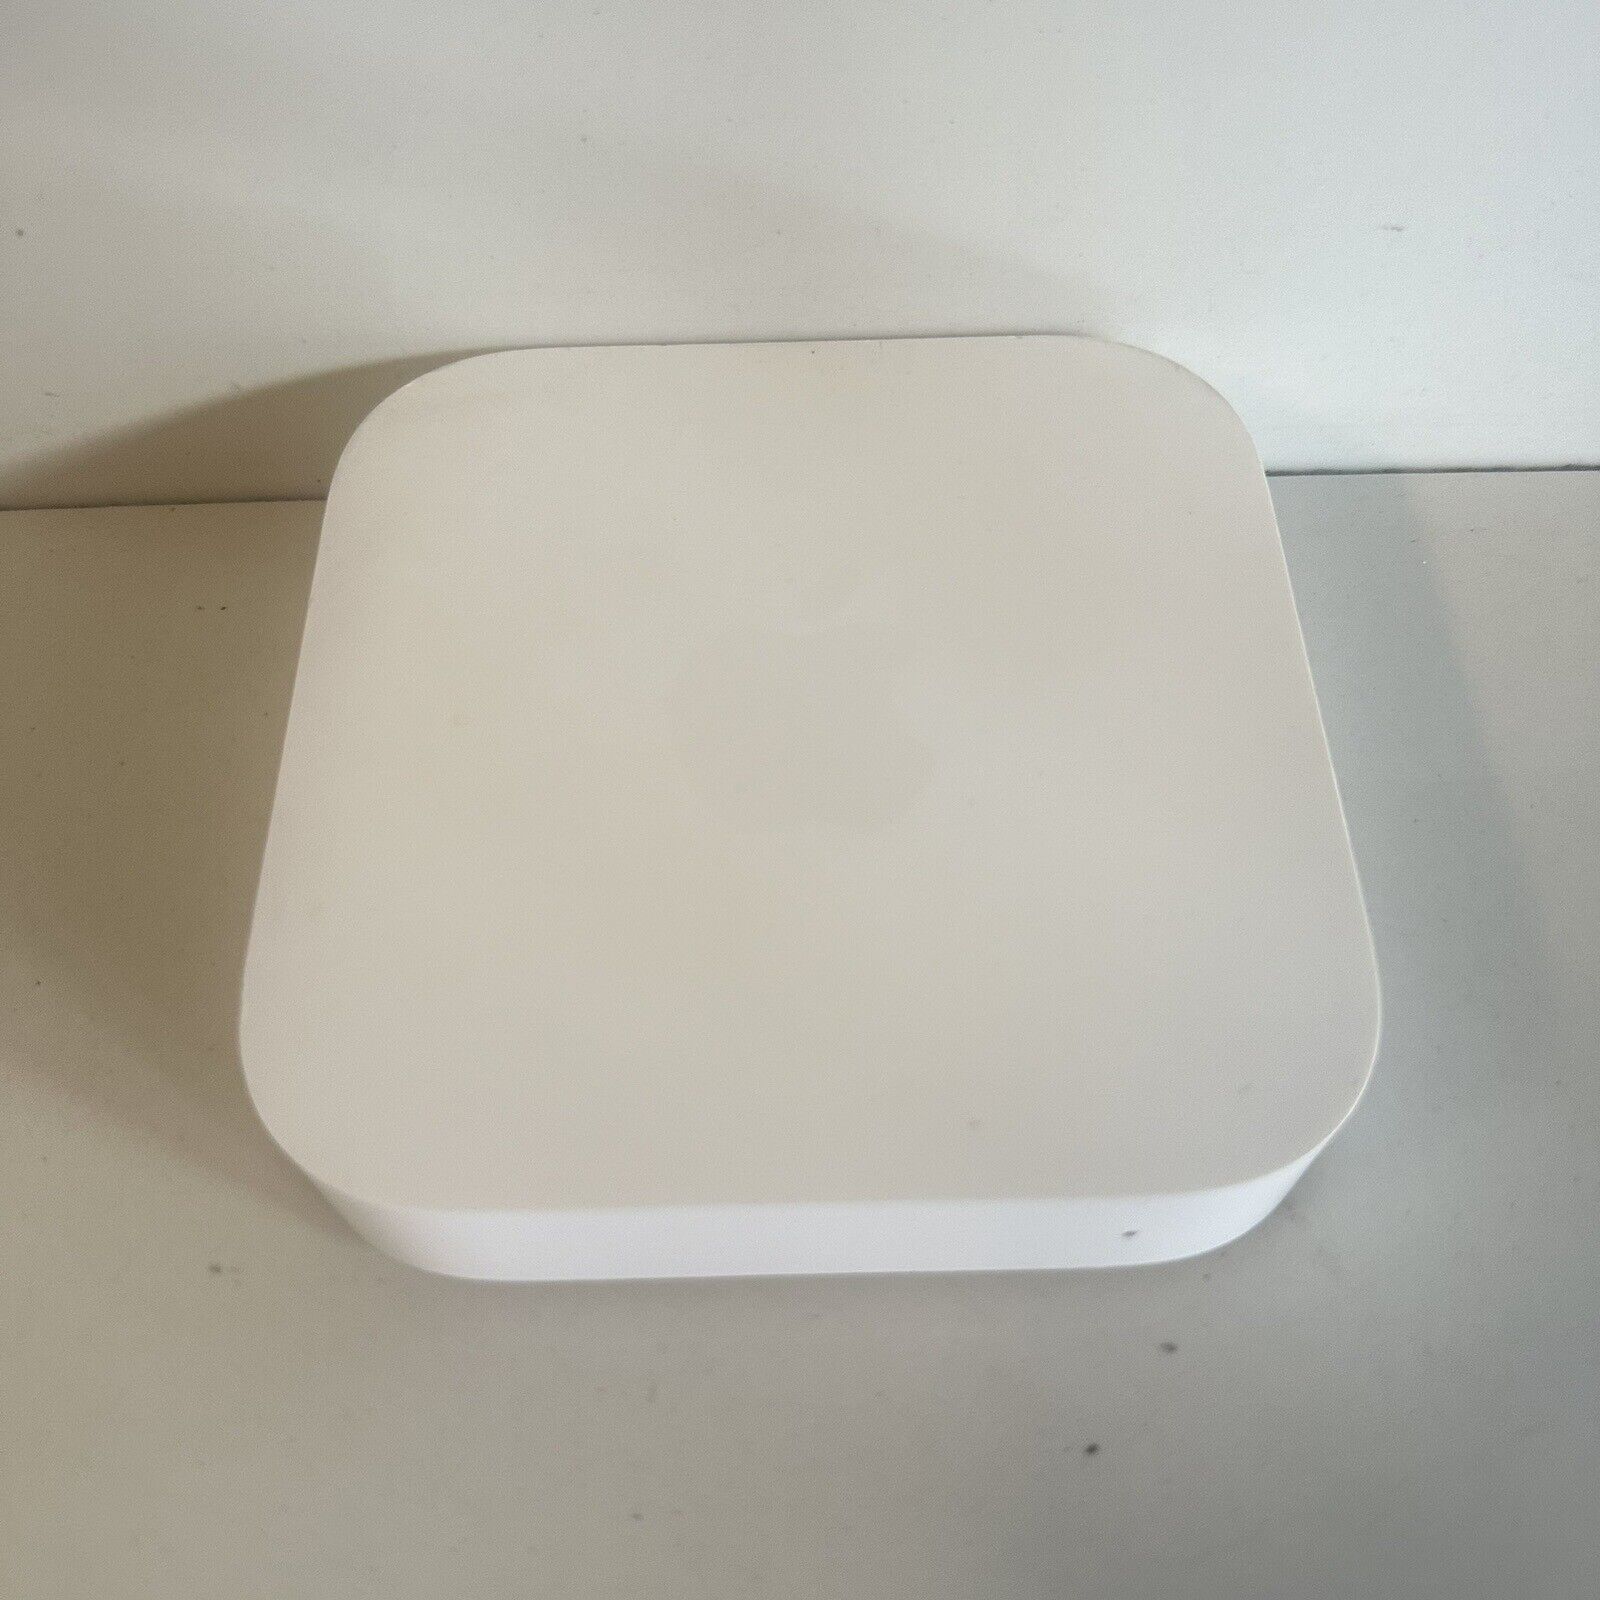 Apple A1392 Airport Express 2nd Generation Dualband 802.11n WiFi Router